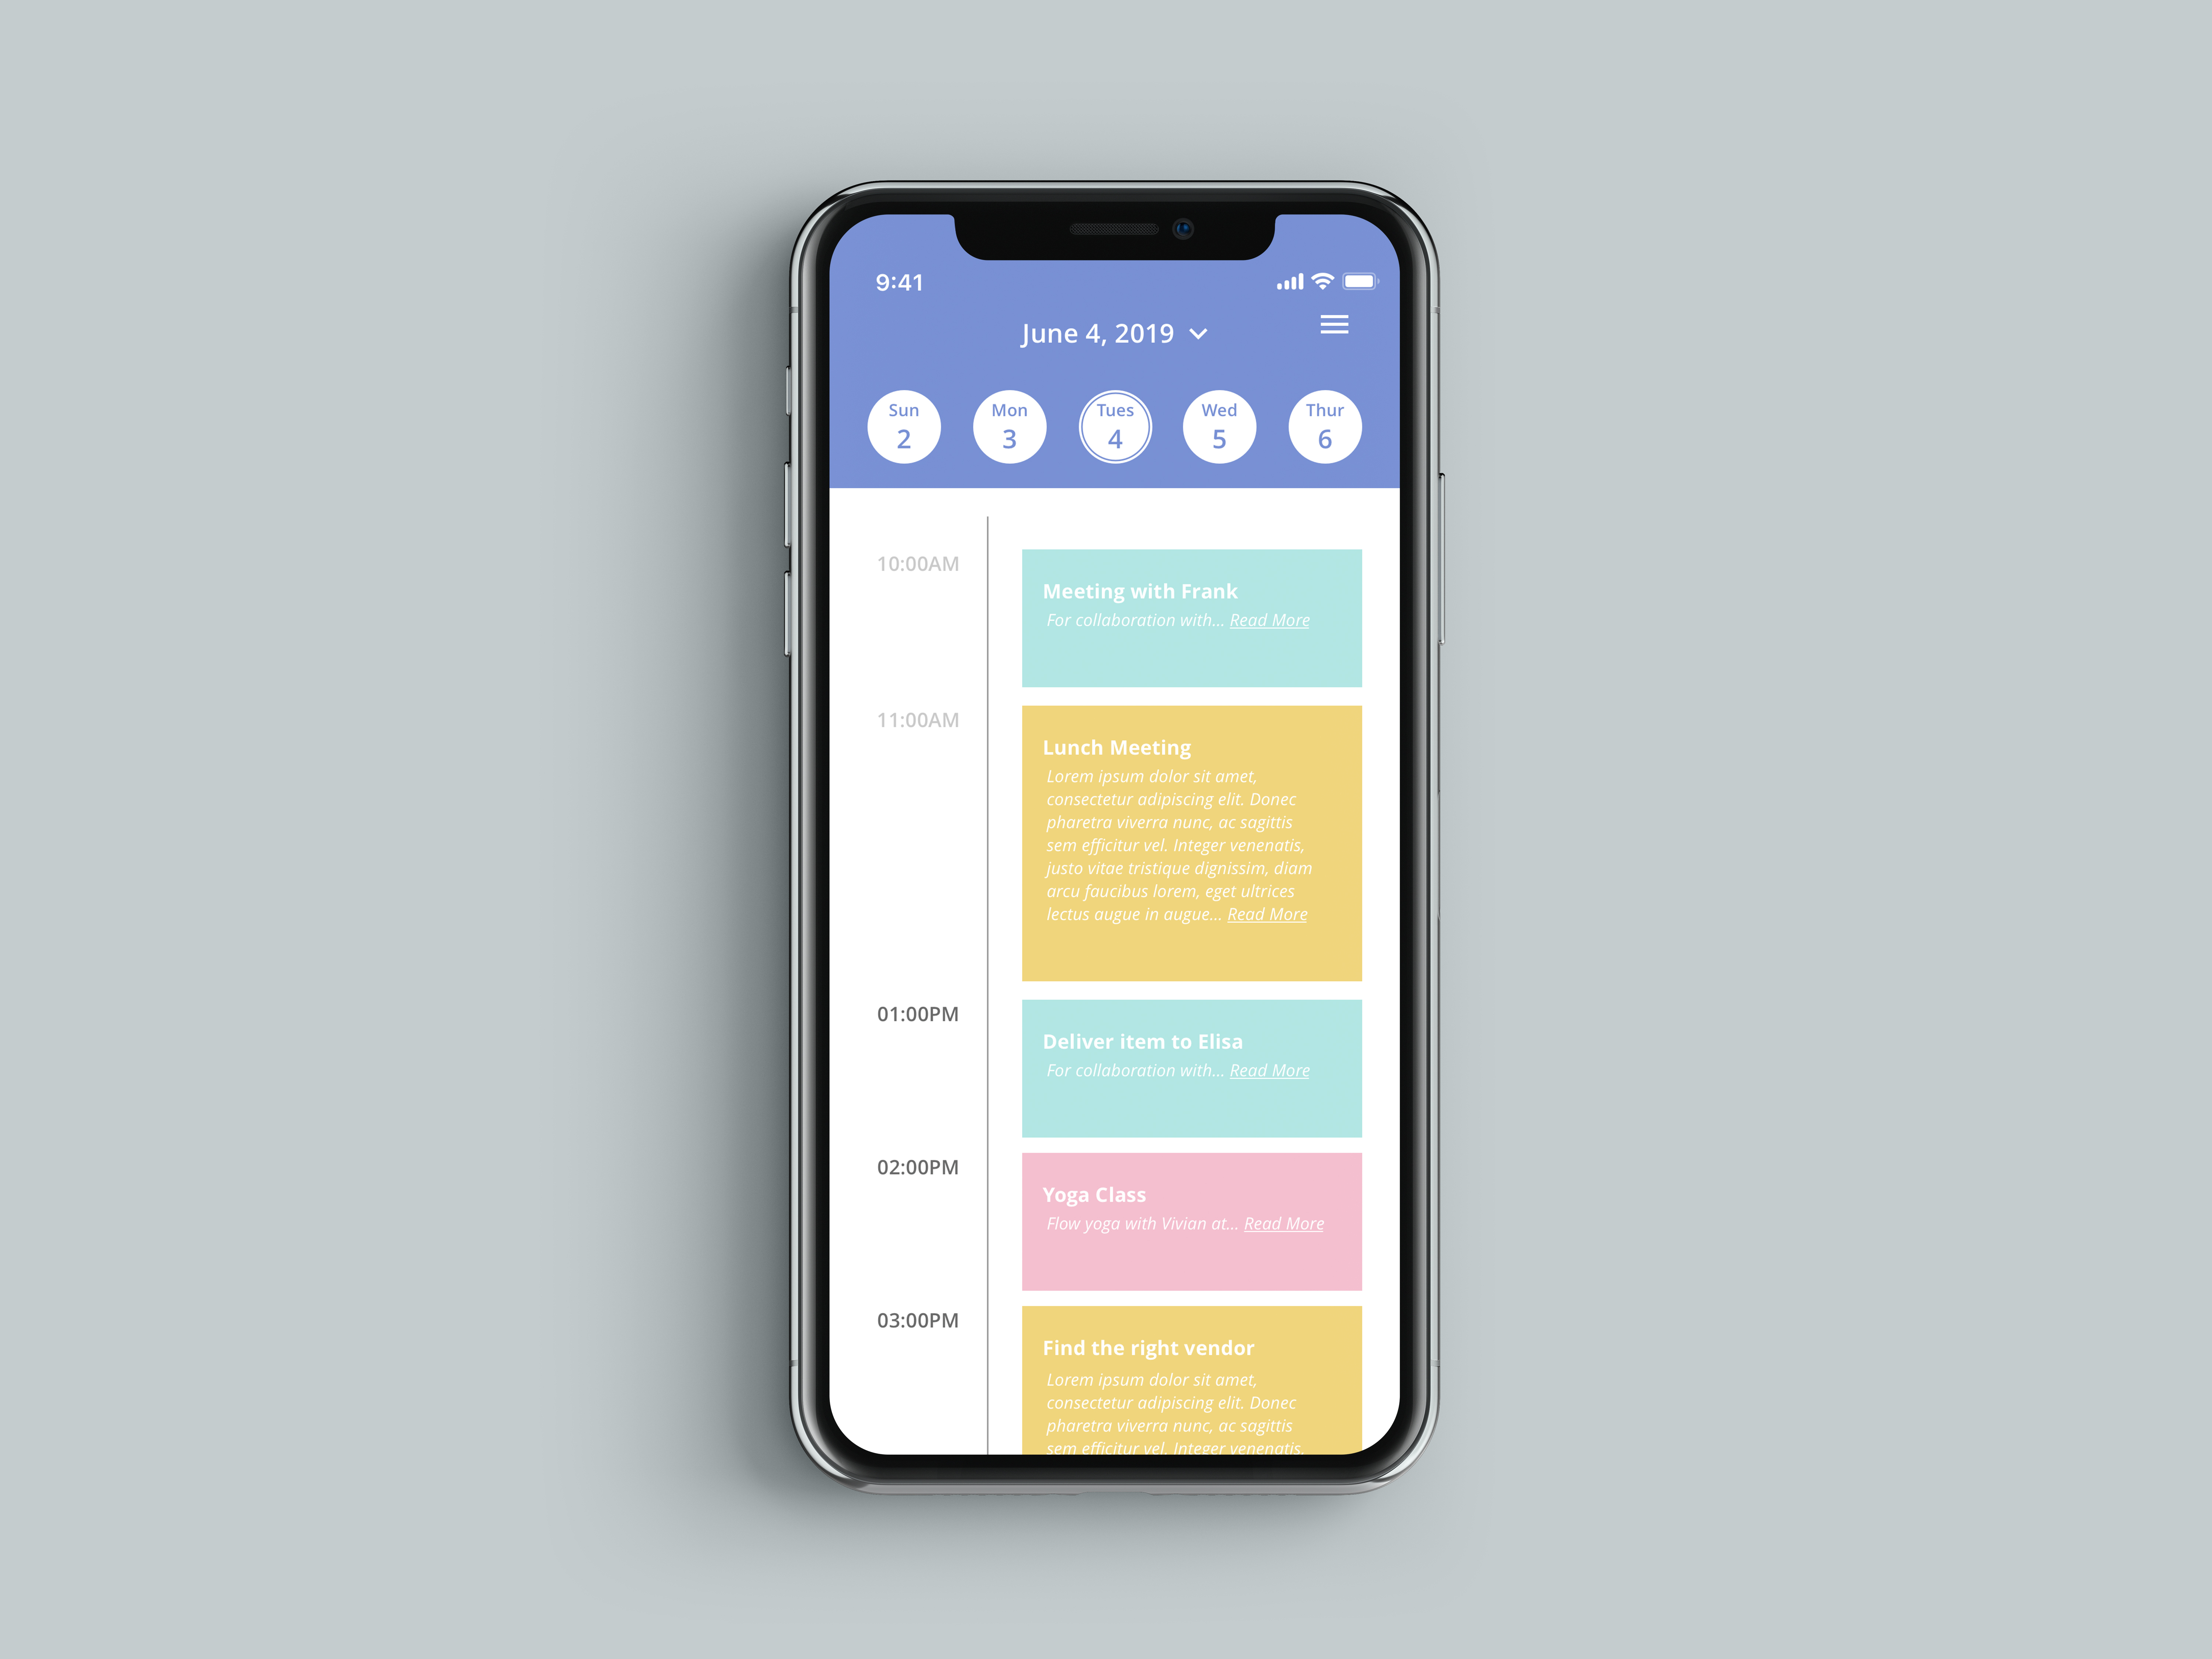 iPhone X Calendar by Dina Chen on Dribbble